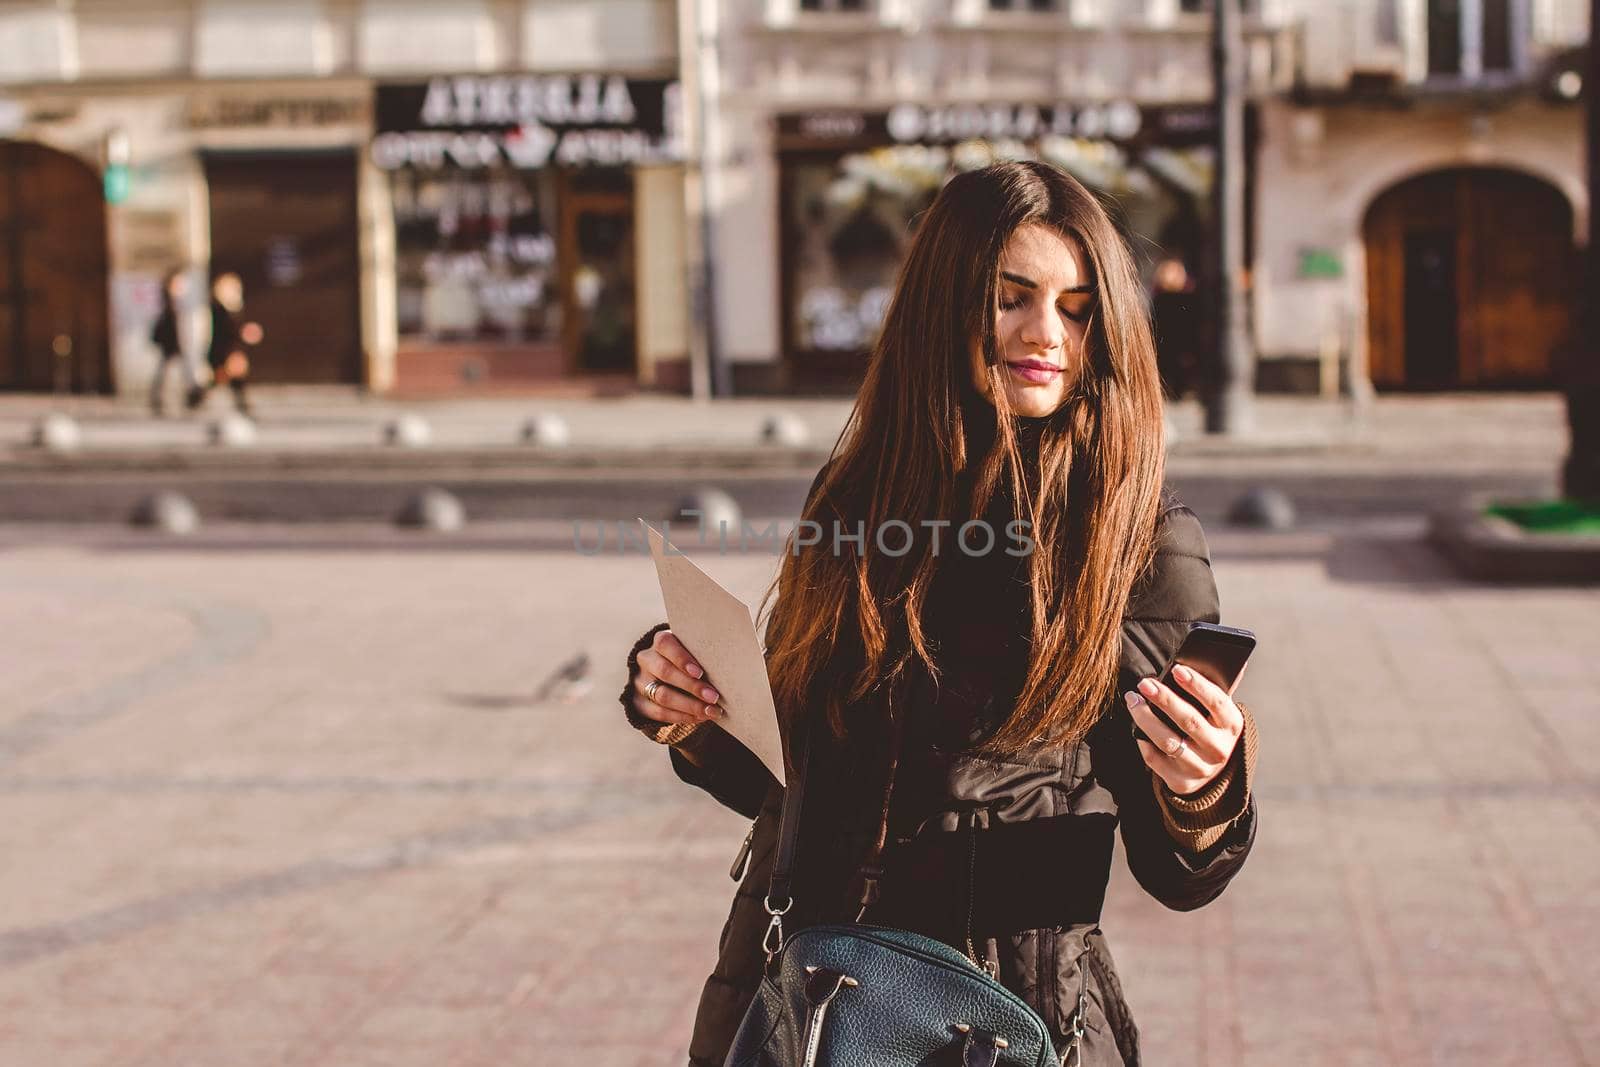 Young nice girl looks at the phone in the middle of a big city.